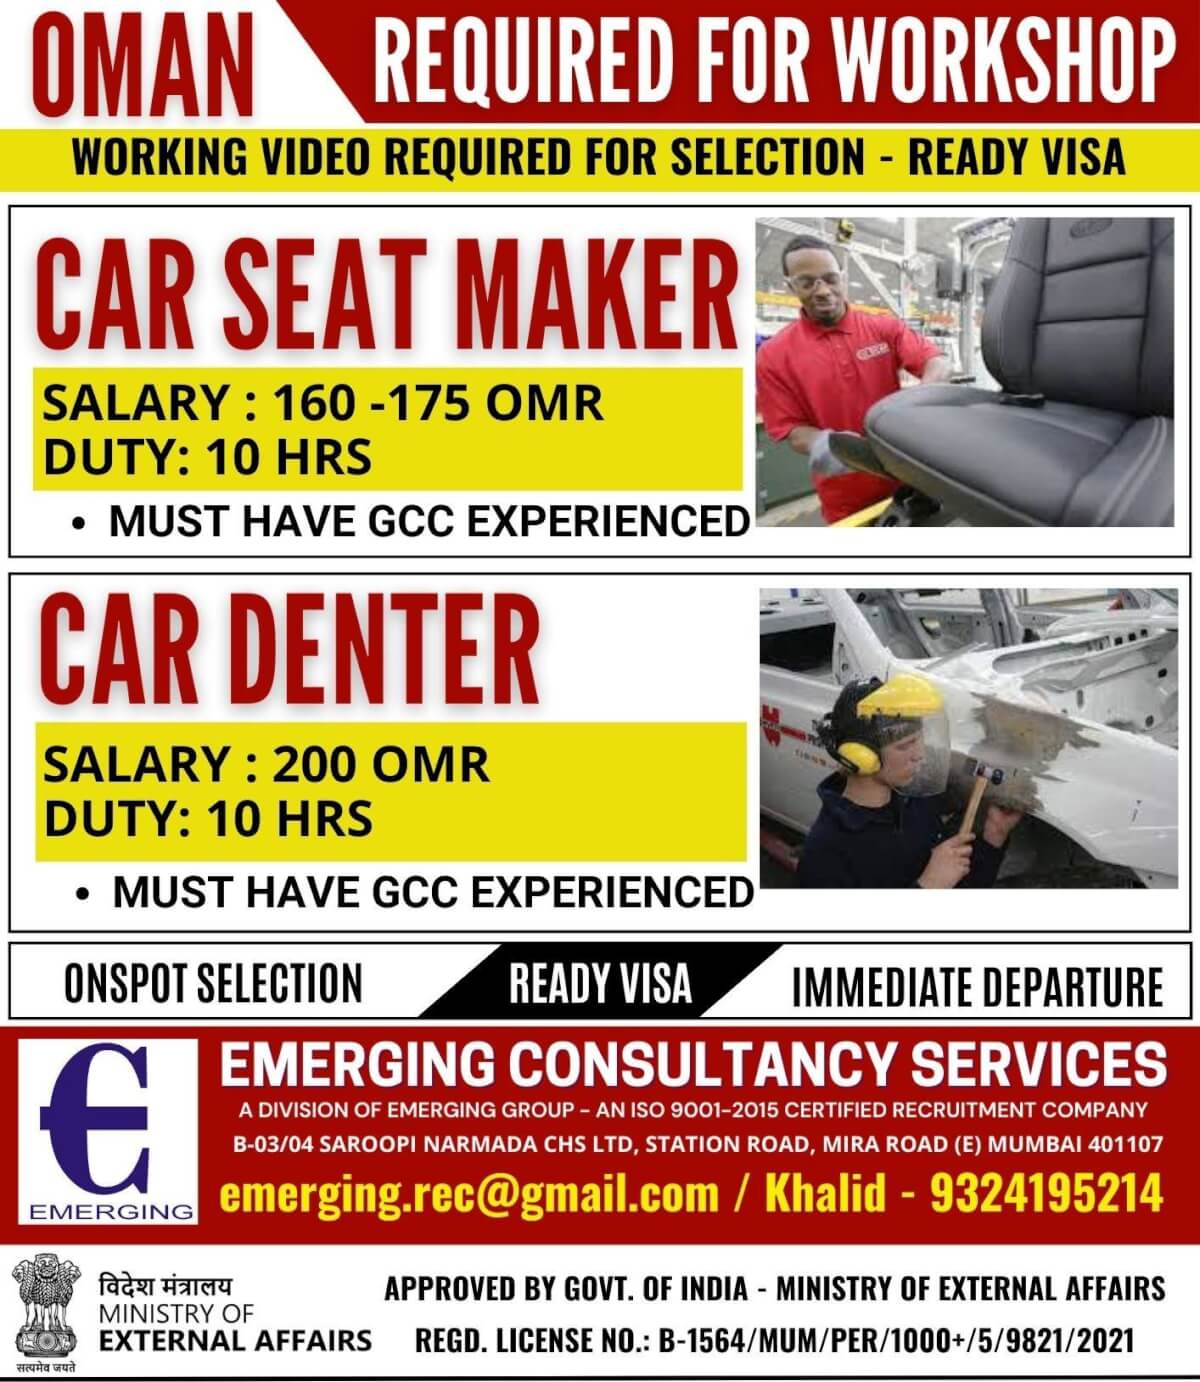 REQUIRED FOR WORKSHOP IN OMAN